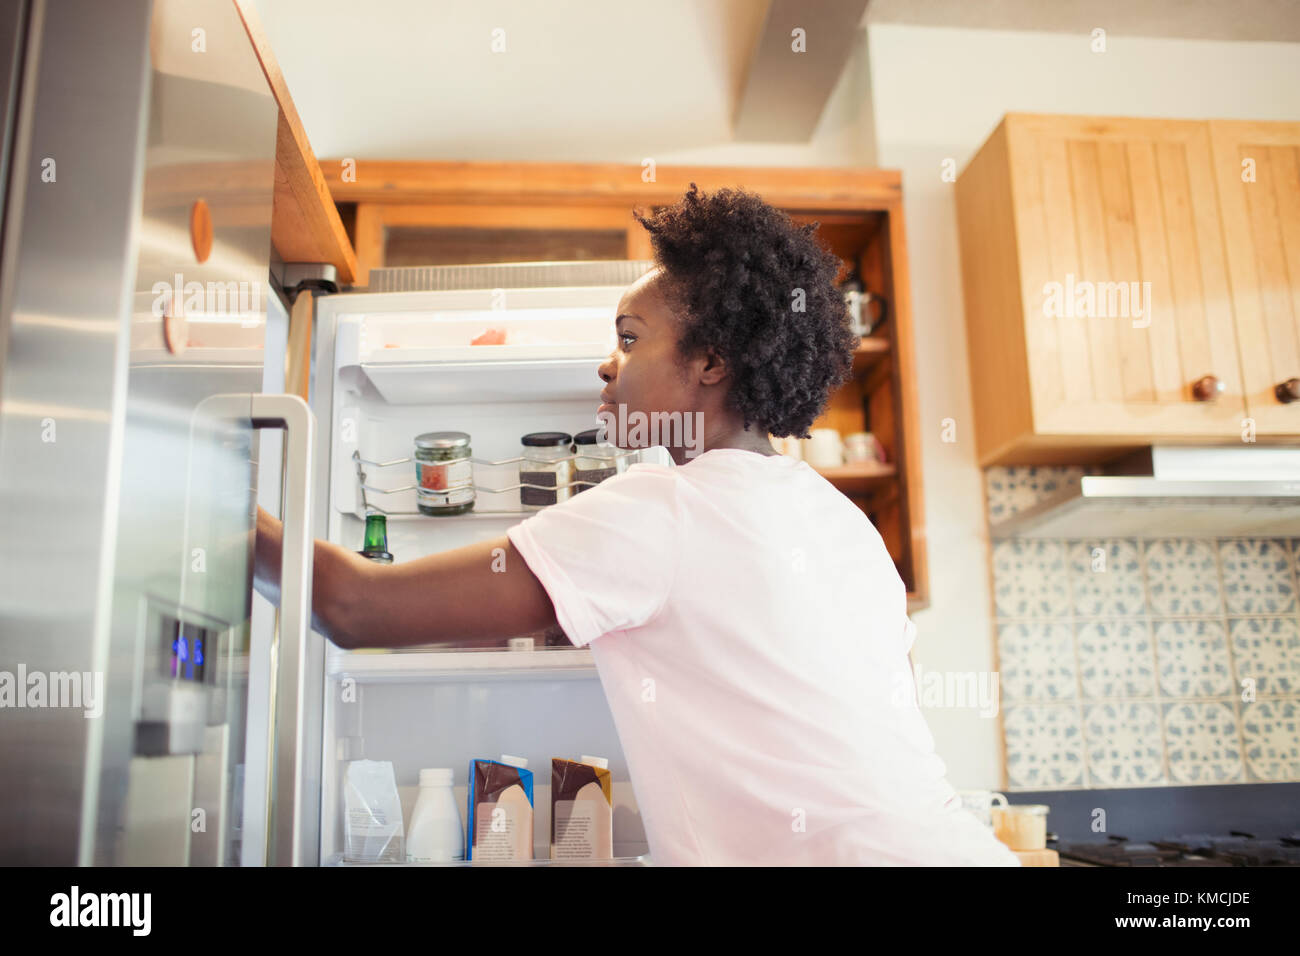 Woman reaching into refrigerator in kitchen Stock Photo